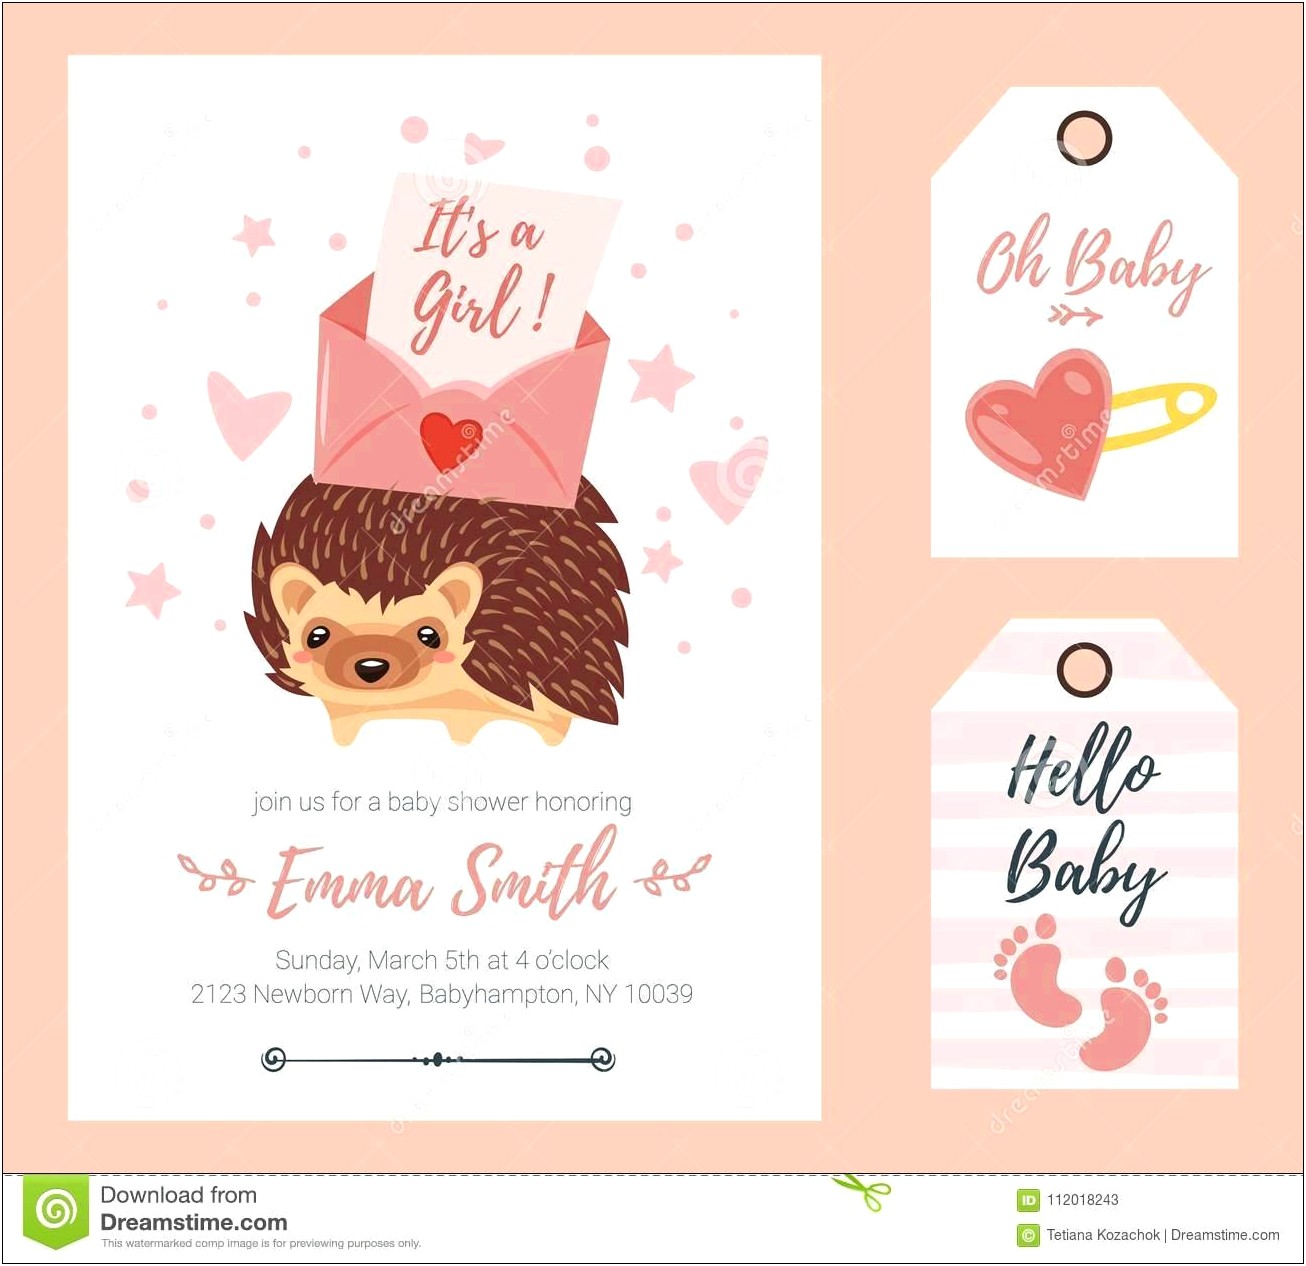 free-printable-baby-shower-templates-girl-templates-resume-designs